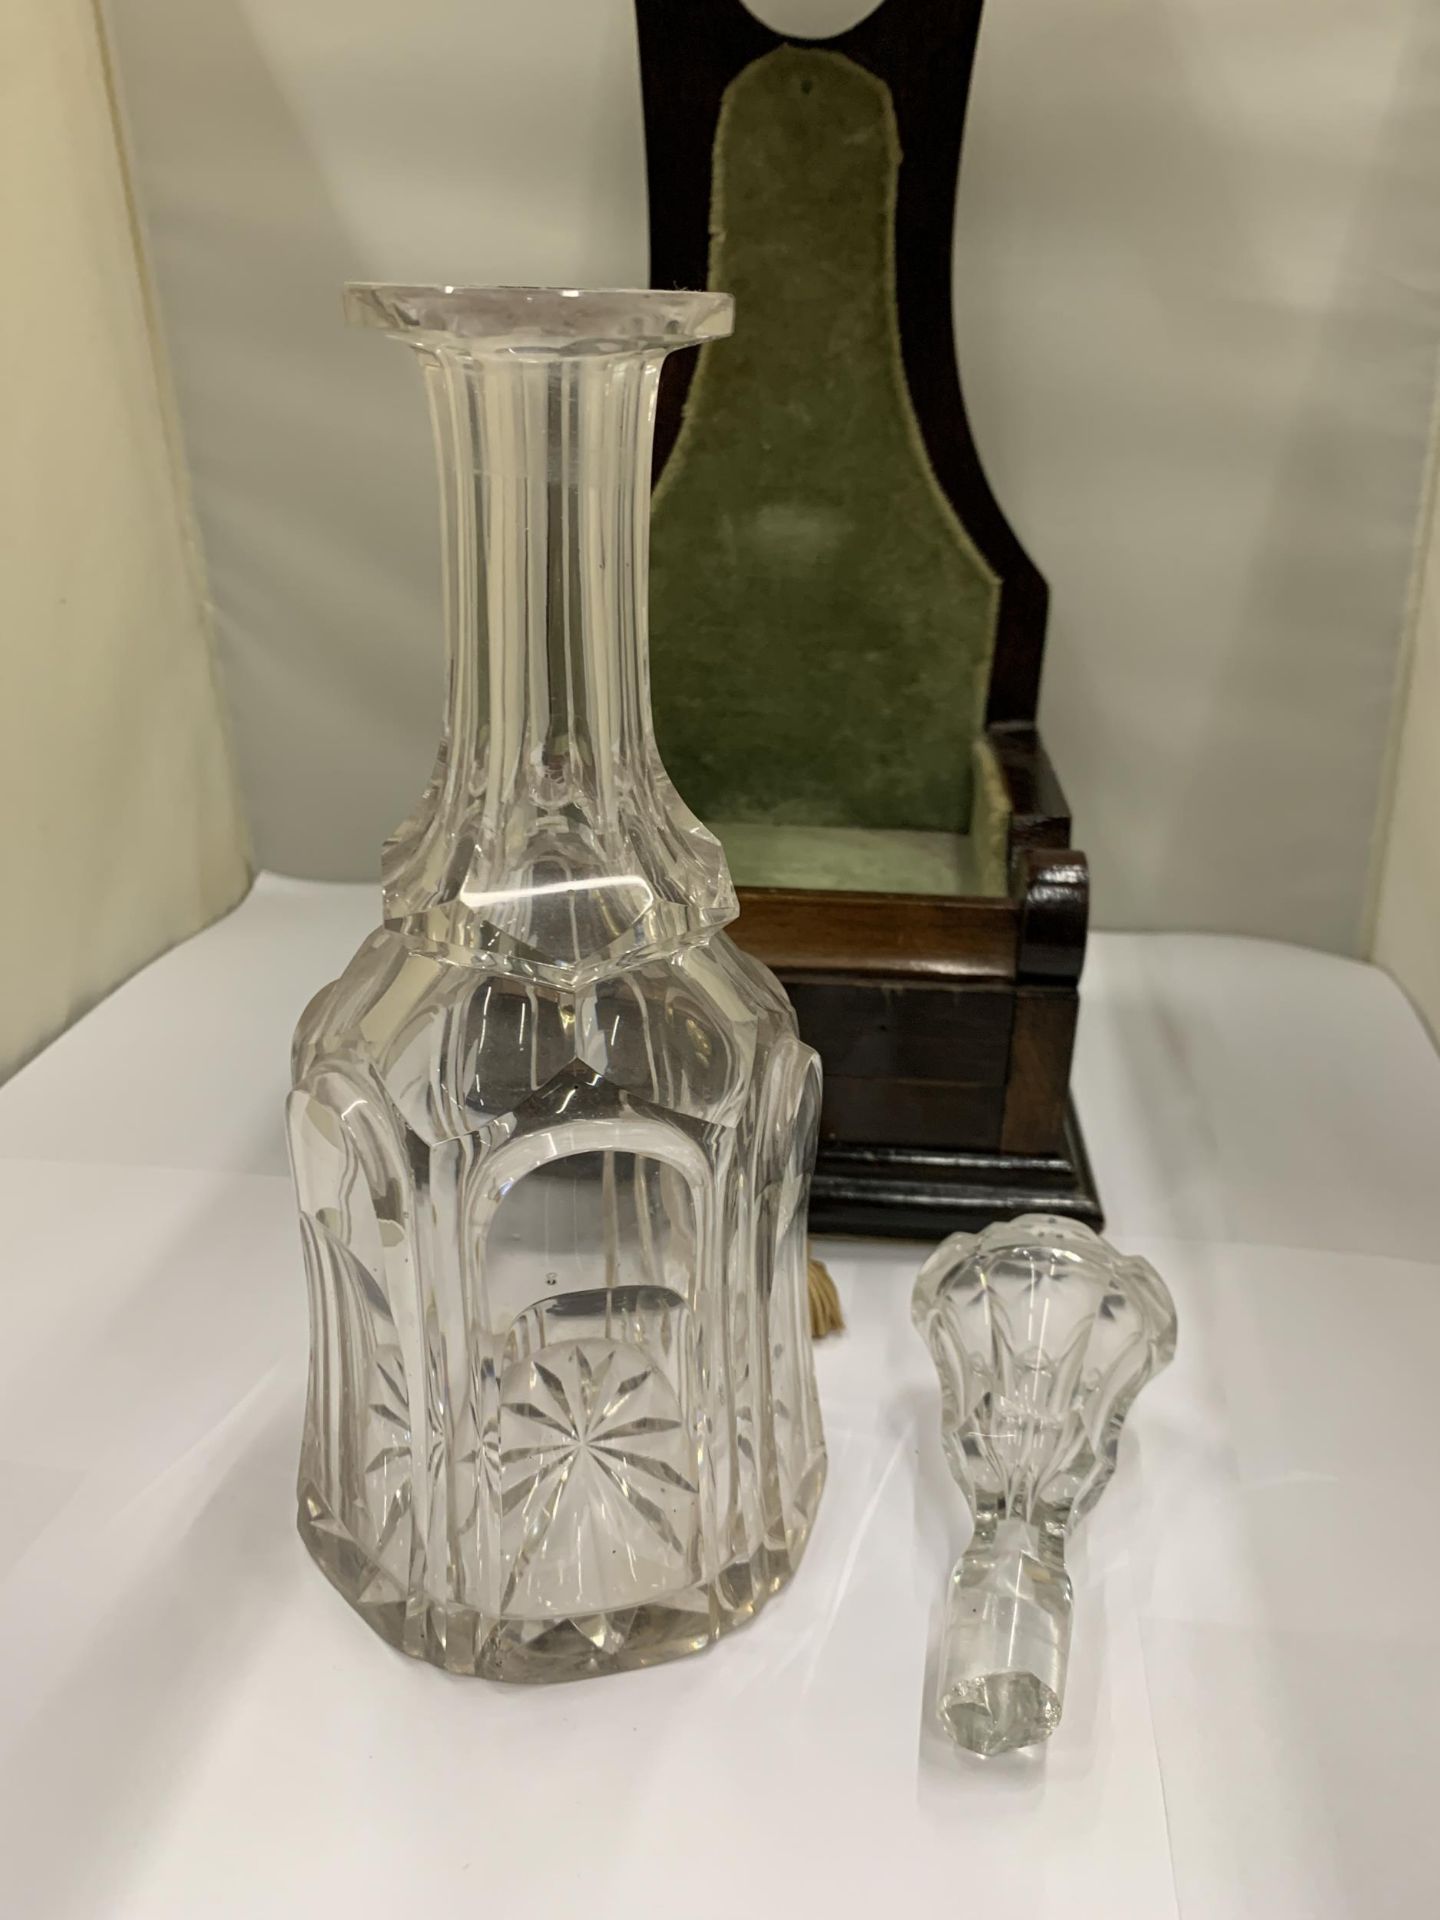 A MAHOGANY SINGLE DECANTER TANTALUS WITH KEY (STOPPER A/F) - Image 5 of 5